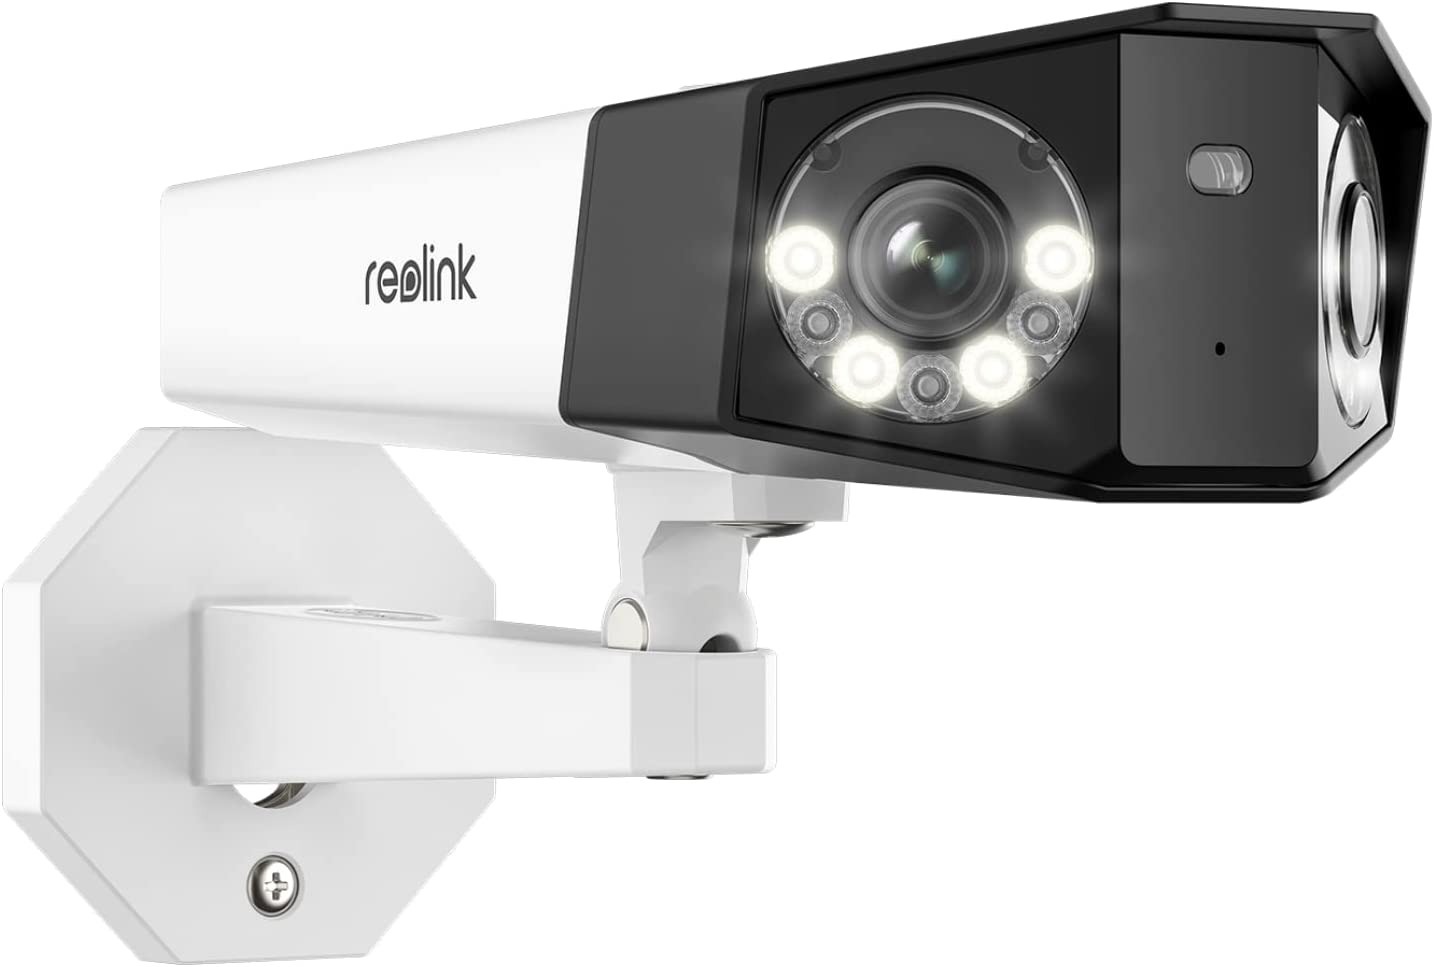 2K Reolink Duo PoE Smart IP Security Camera w/ Night Vision & Two-Way Audio: $83.98 (1 Camera), $164.48 (2 Cameras) + Free Shipping